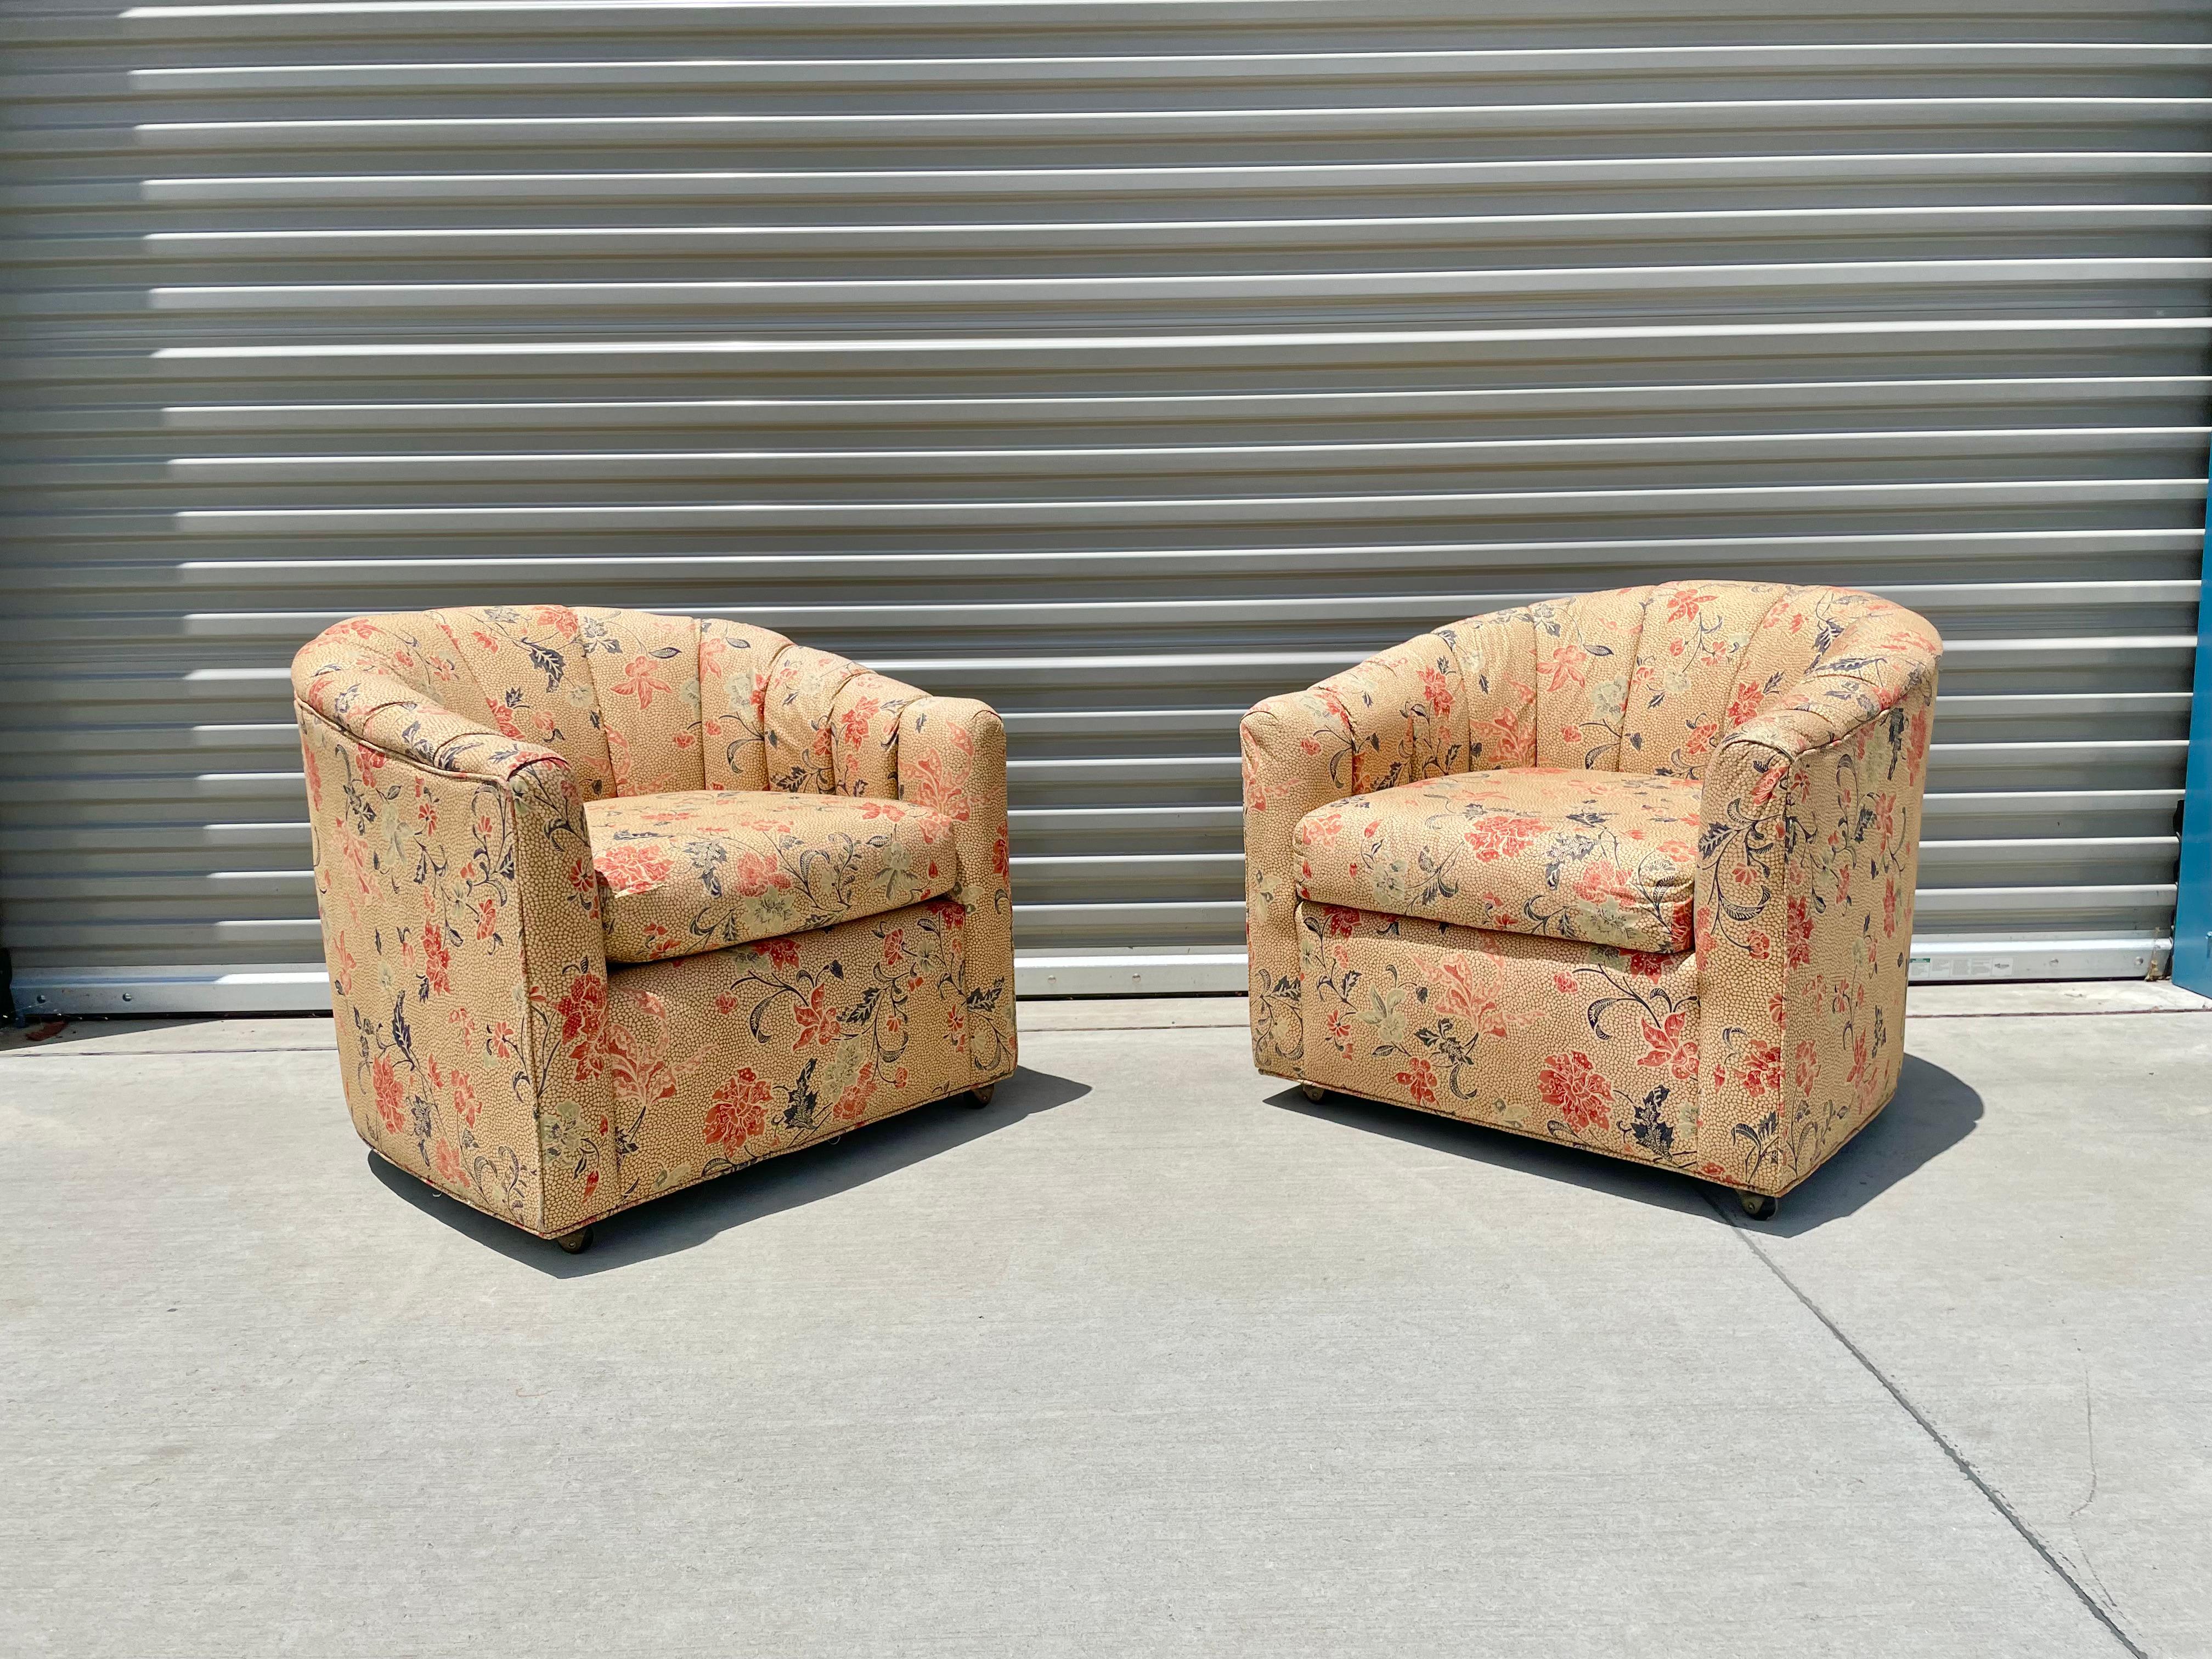 Stunning midcentury lounge chairs were designed and manufactured in the united states circa 1970s. These vintage pair of lounge chairs feature a four-wheel base letting you move them whenever you like to rearrange the living room. The chairs feature